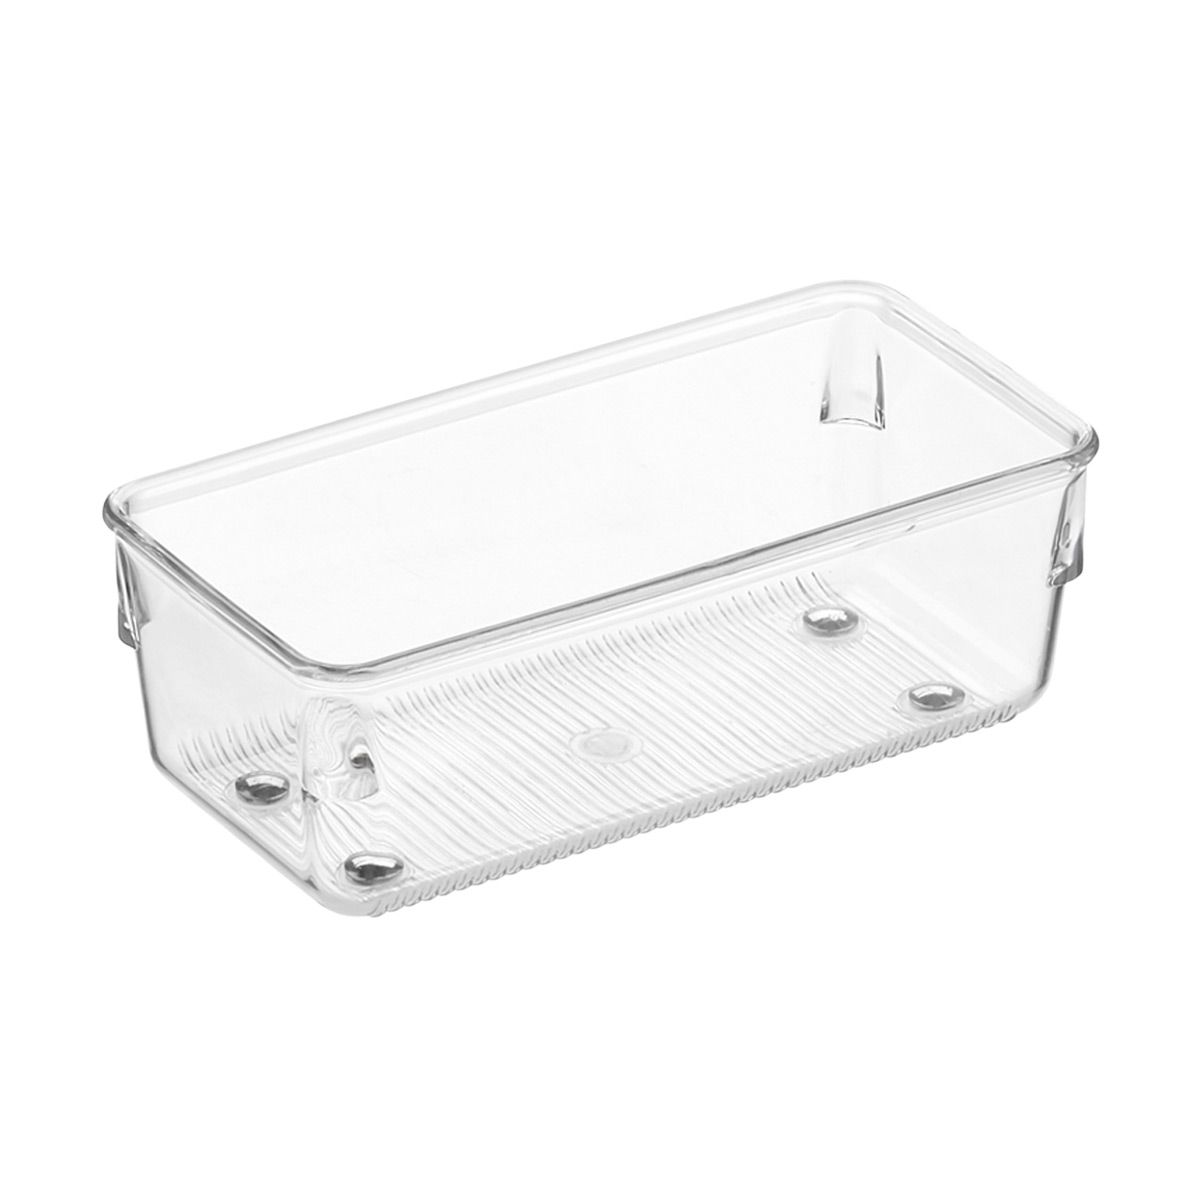 Shallow Drawer Organizer | The Container Store